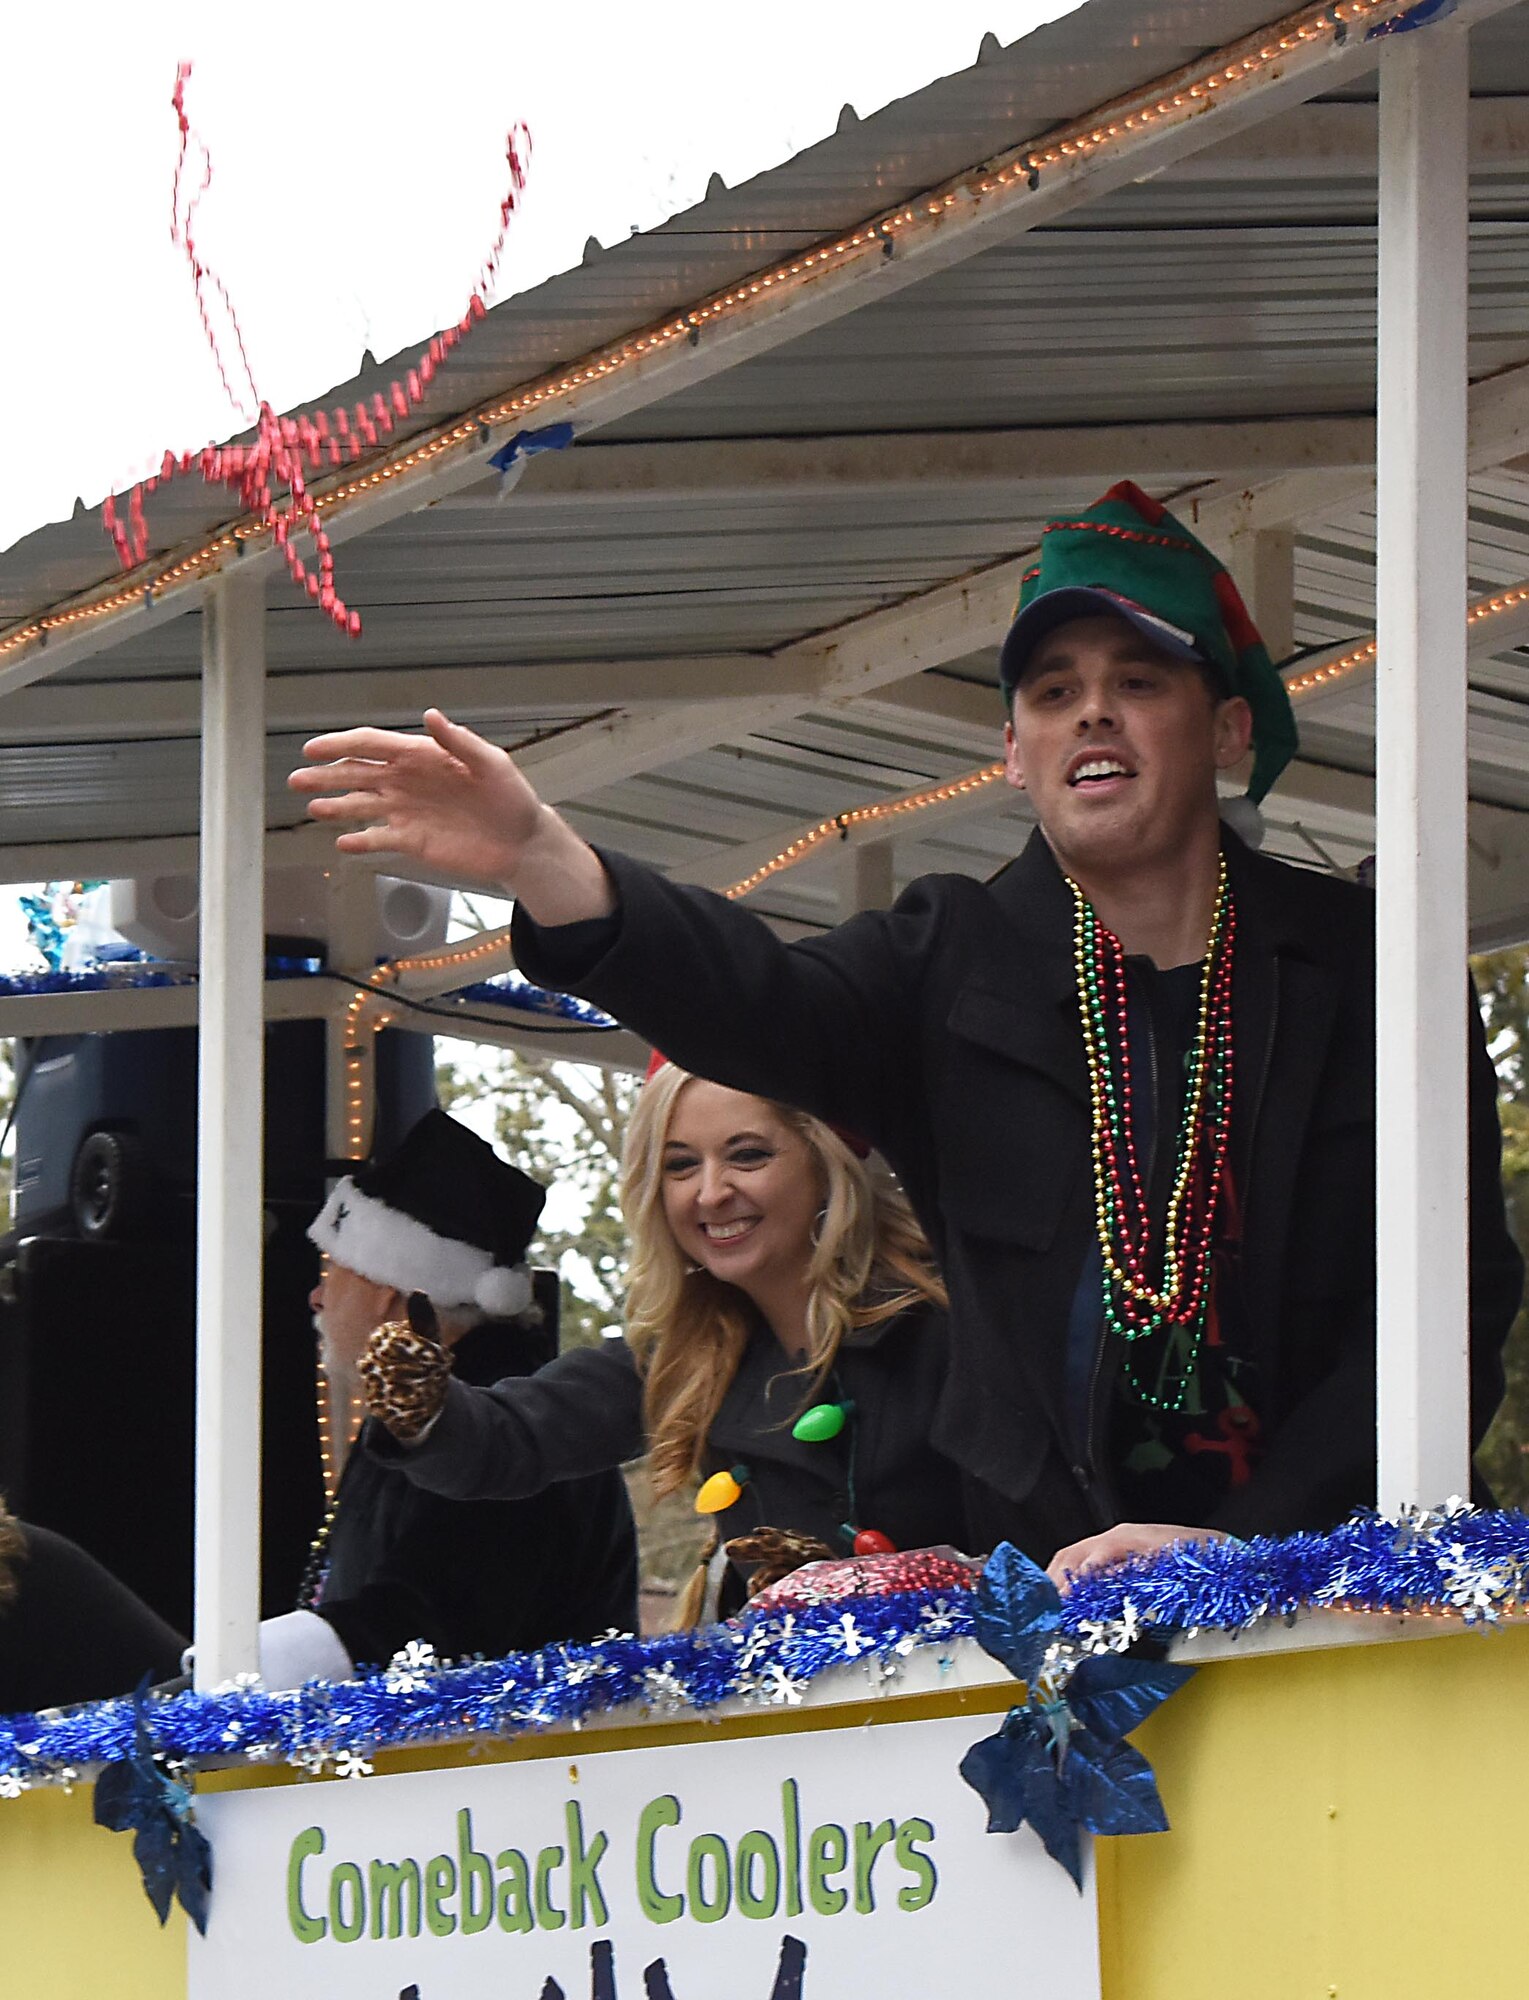 Shea Dobson, Ocean Springs Mayor, tosses beads into the crowd during the Ocean Springs Christmas Parade in Ocean Springs, Mississippi, Dec. 9, 2018. The Keesler Air Force Base Honor Guard and 81st Training Group Airmen participated in the event. (U.S. Air Force photo by Kemberly Groue)